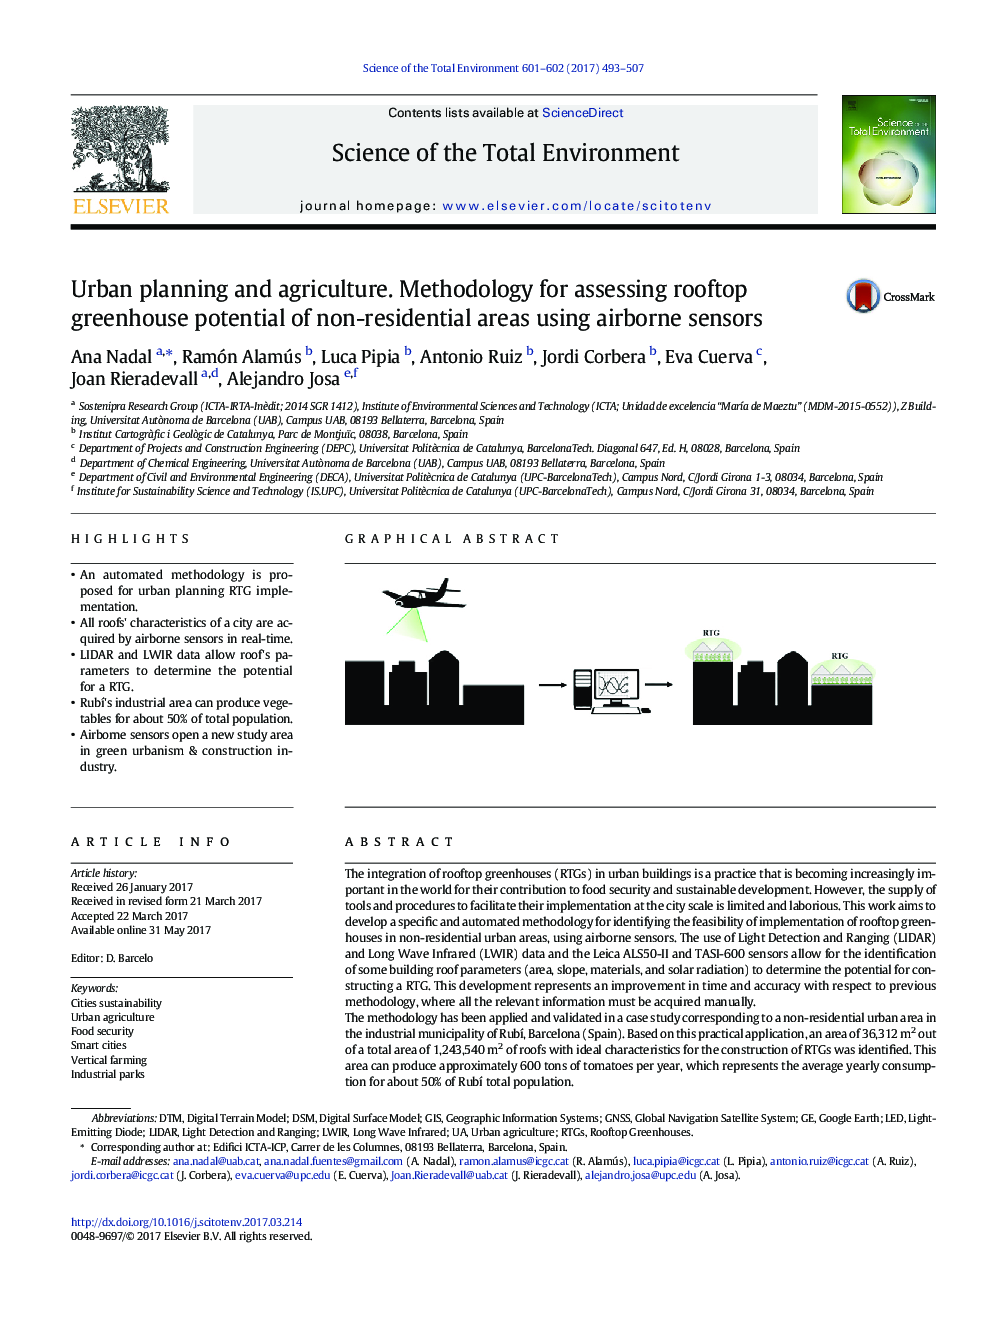 Urban planning and agriculture. Methodology for assessing rooftop greenhouse potential of non-residential areas using airborne sensors